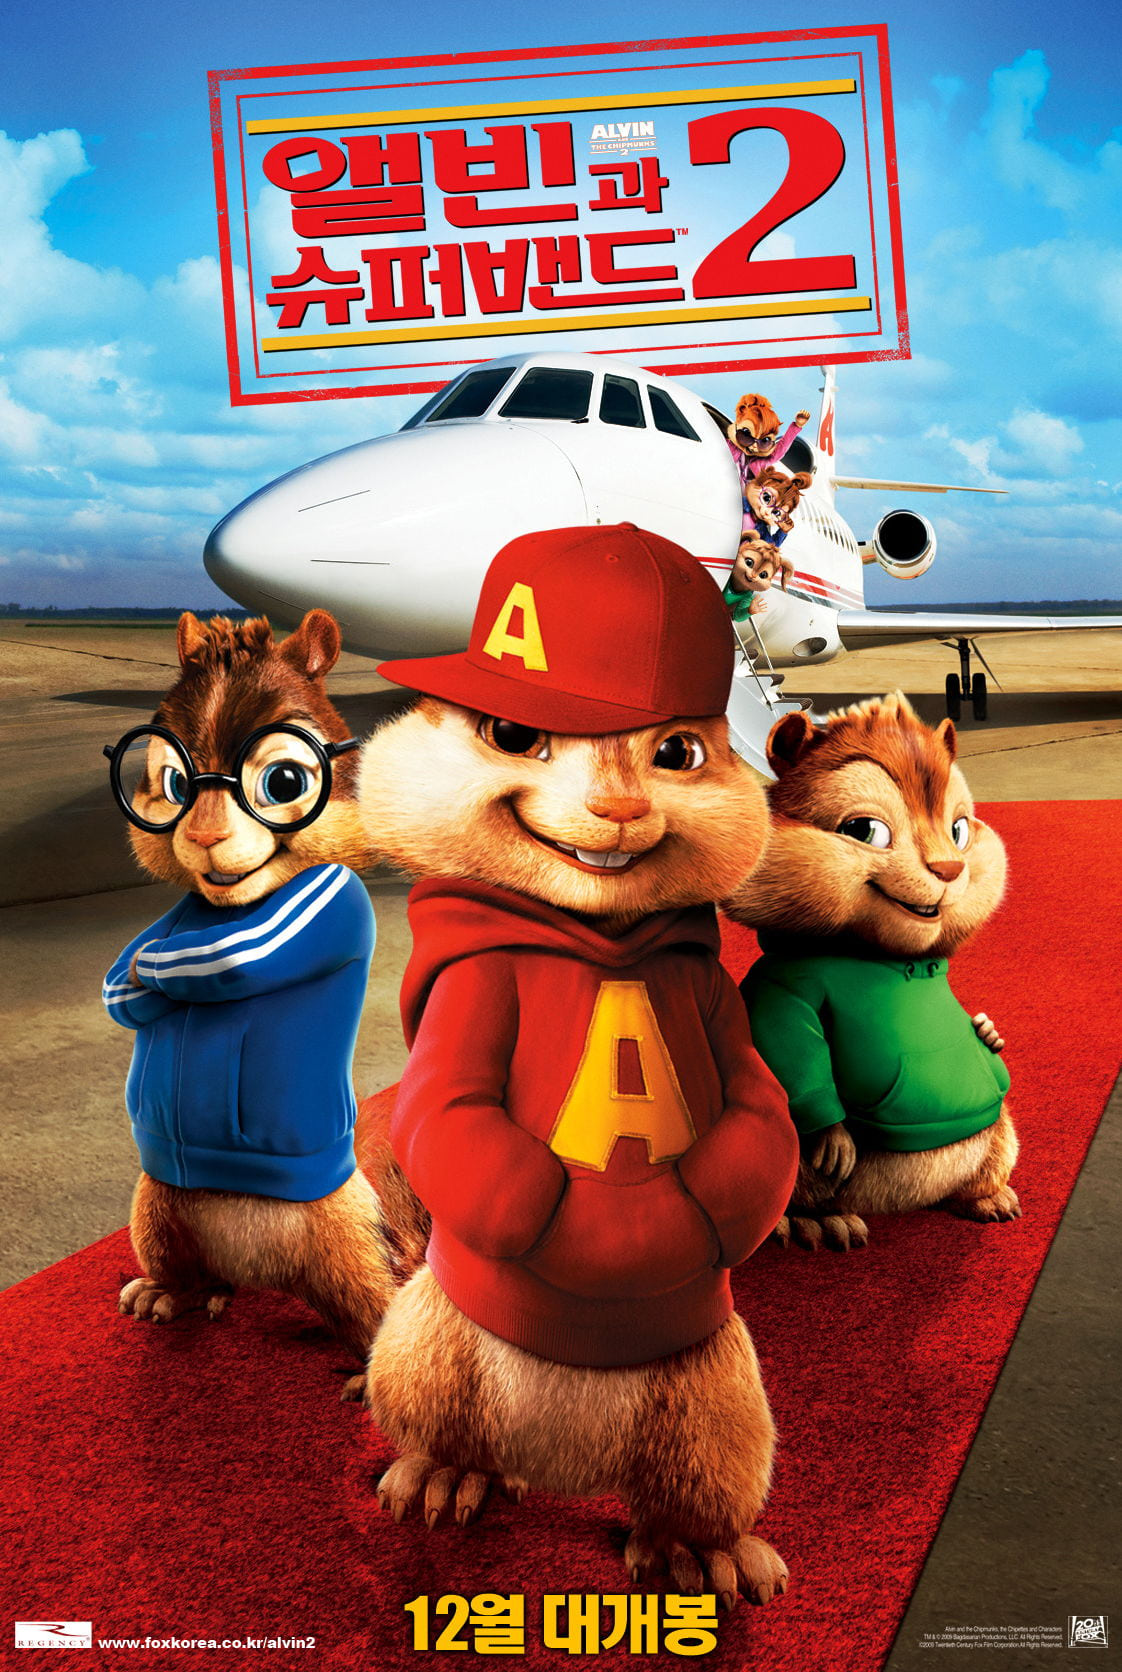 alvin and the chipmunks the squeakquel full movie online